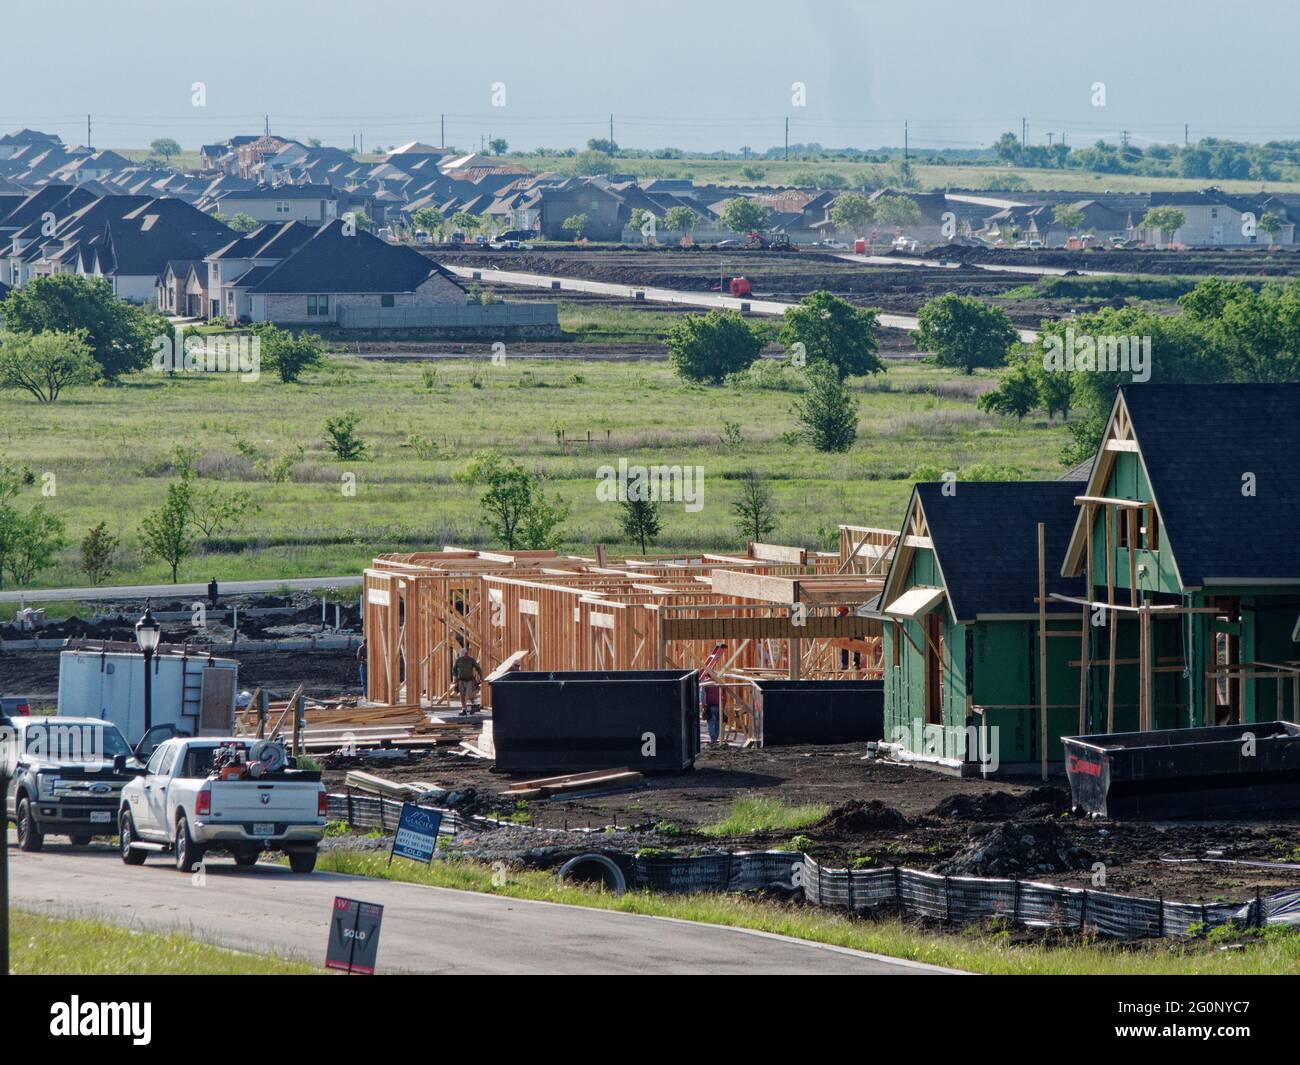 One of the fastest growing states in the USA, large new homes take over the prairie north of Fort Worth, Texas, midway between Fort Worth and Dallas and a direct highway into Dallas, Texas. Shortage of wood has caused prices for new homes to rise even more. Stock Photo